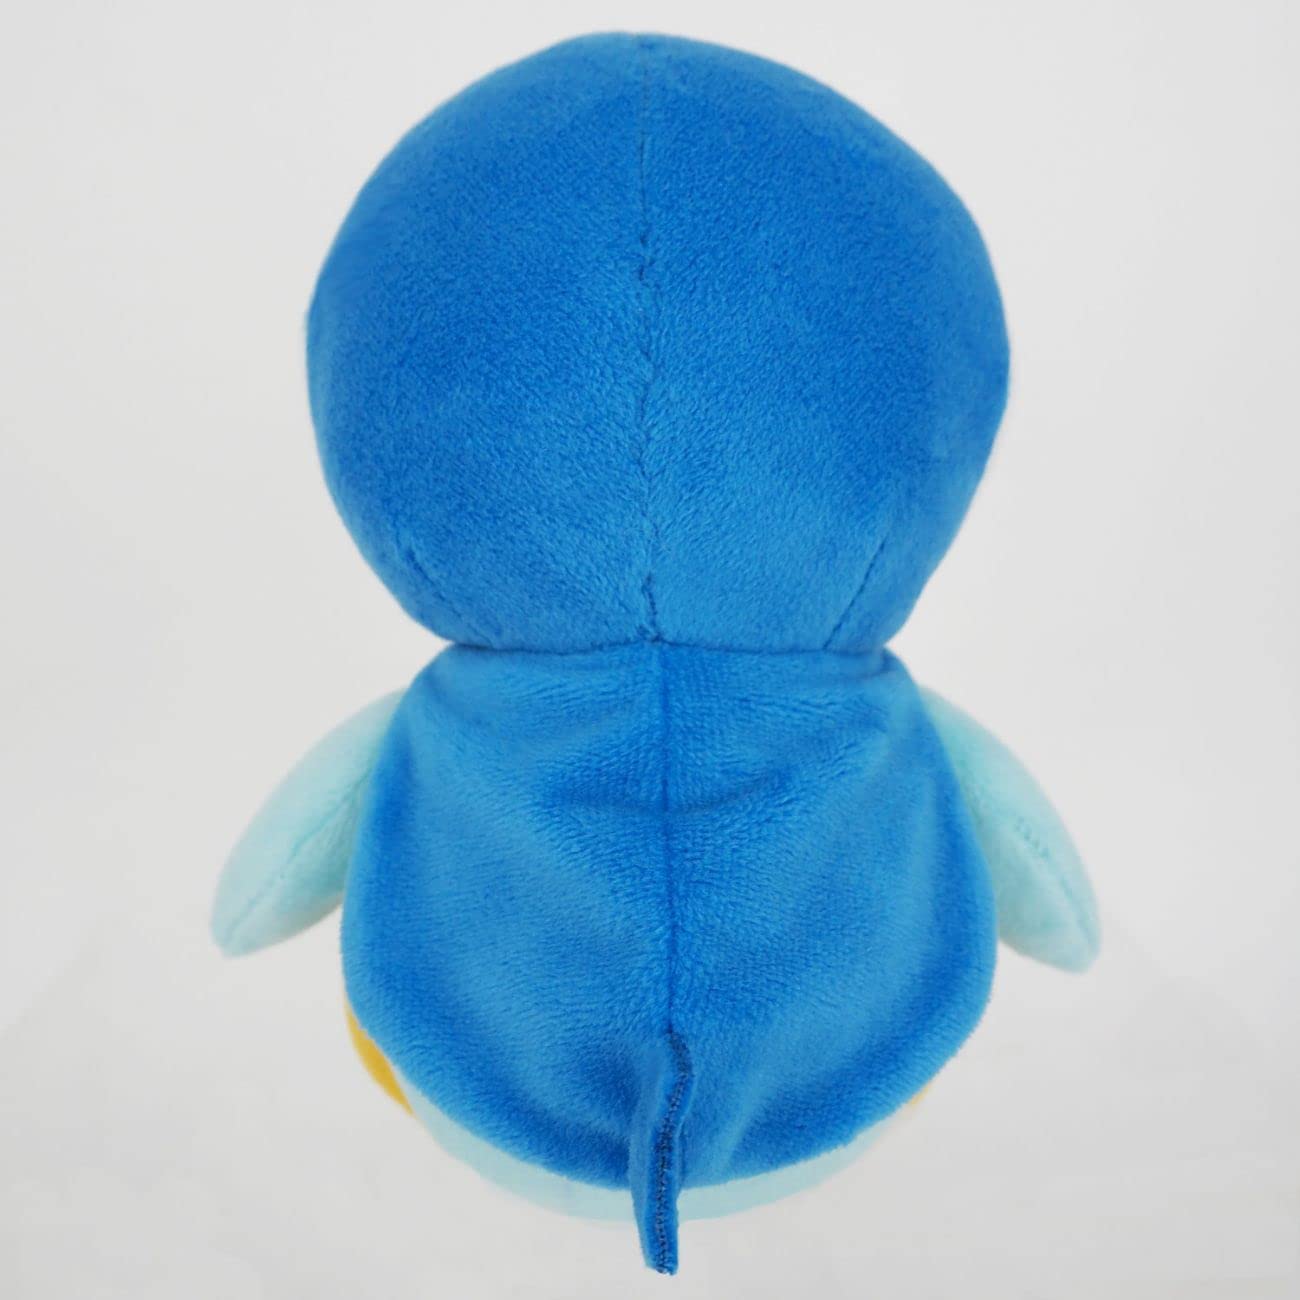 Sanei Pokemon All Star Collection - PP89 - Piplup Plush 6", Blue